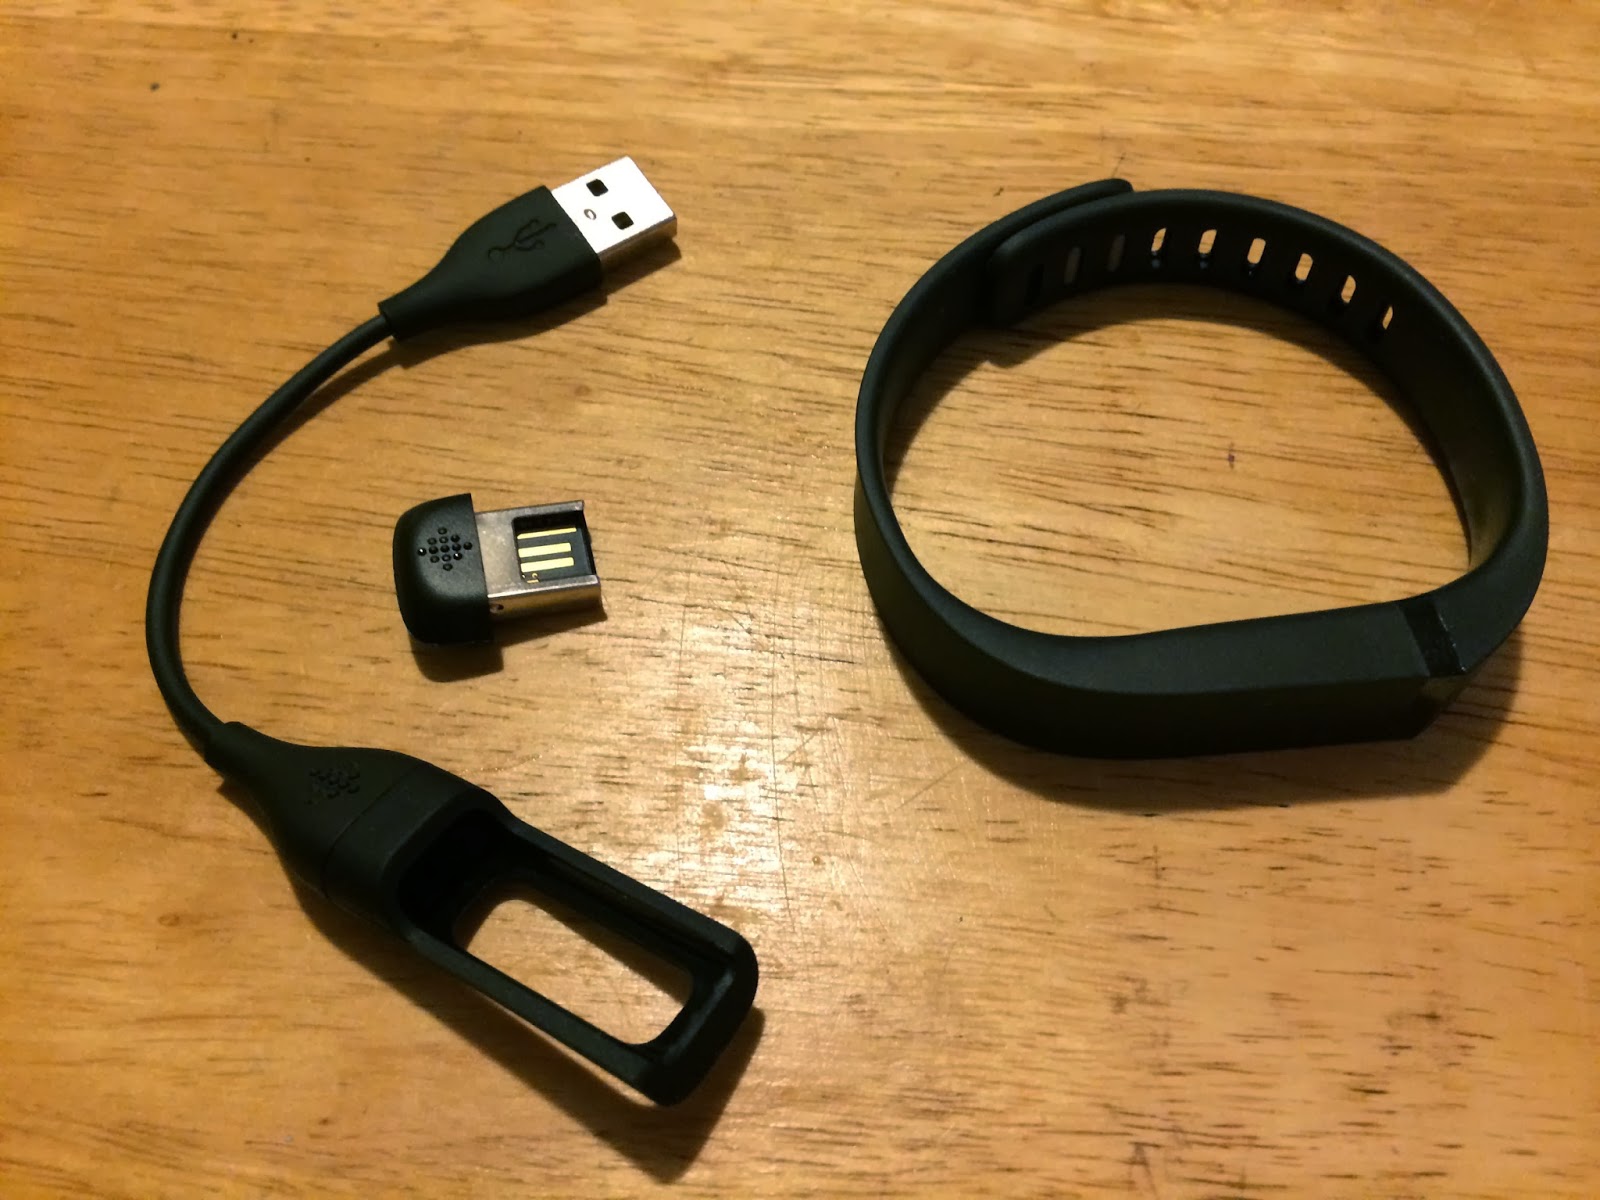 FitBit Flex Activity Tracker #Review - First Time Mom and Losing It